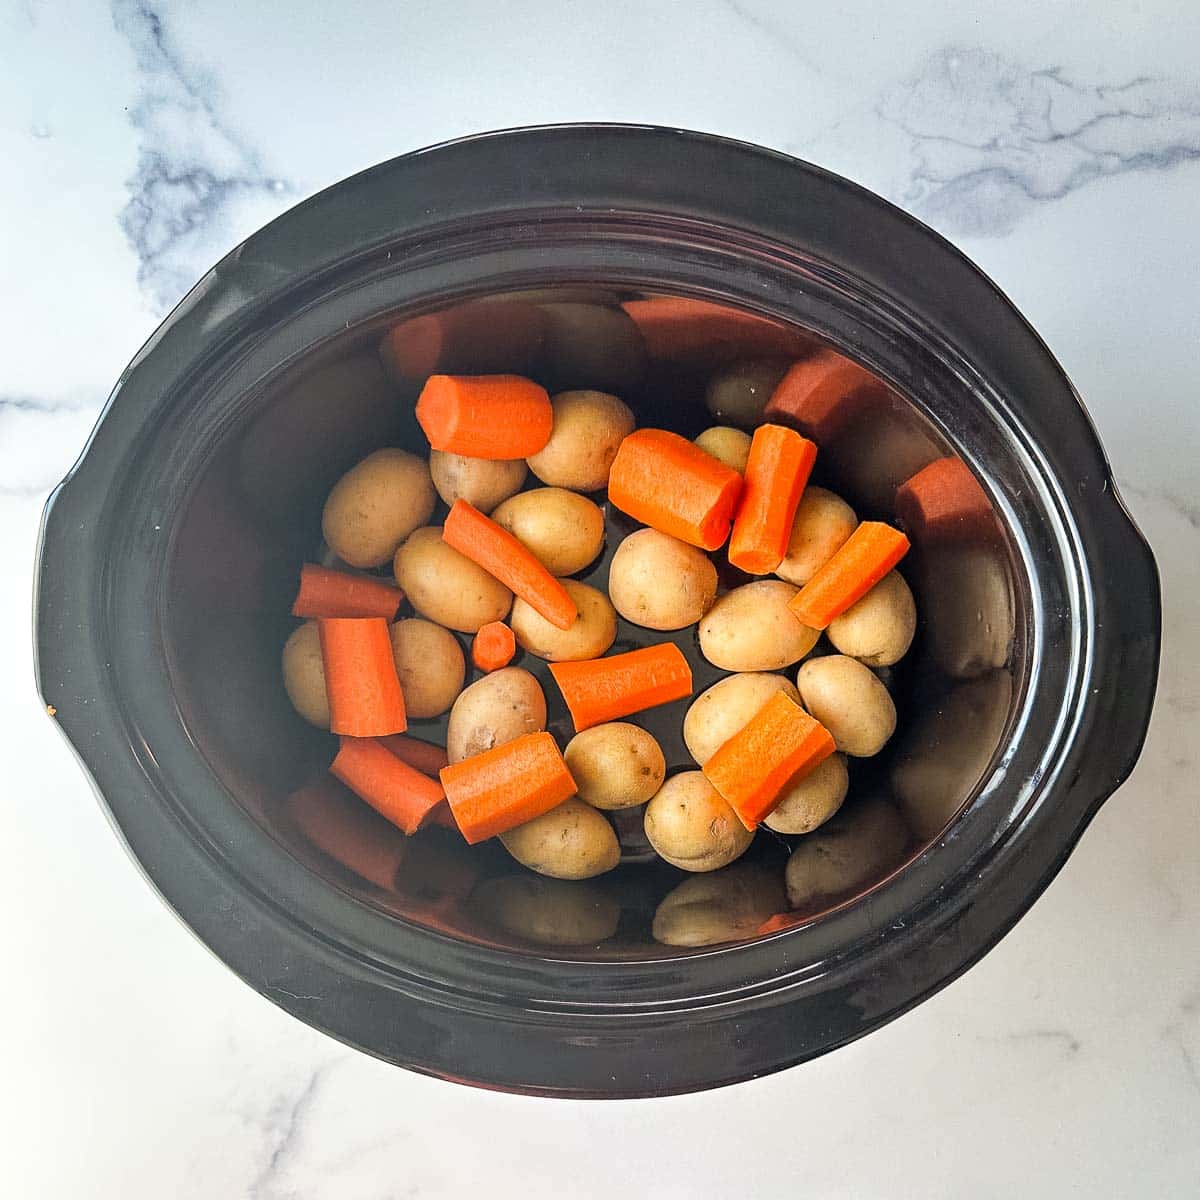 A crock pot filled with carrots and potatoes.